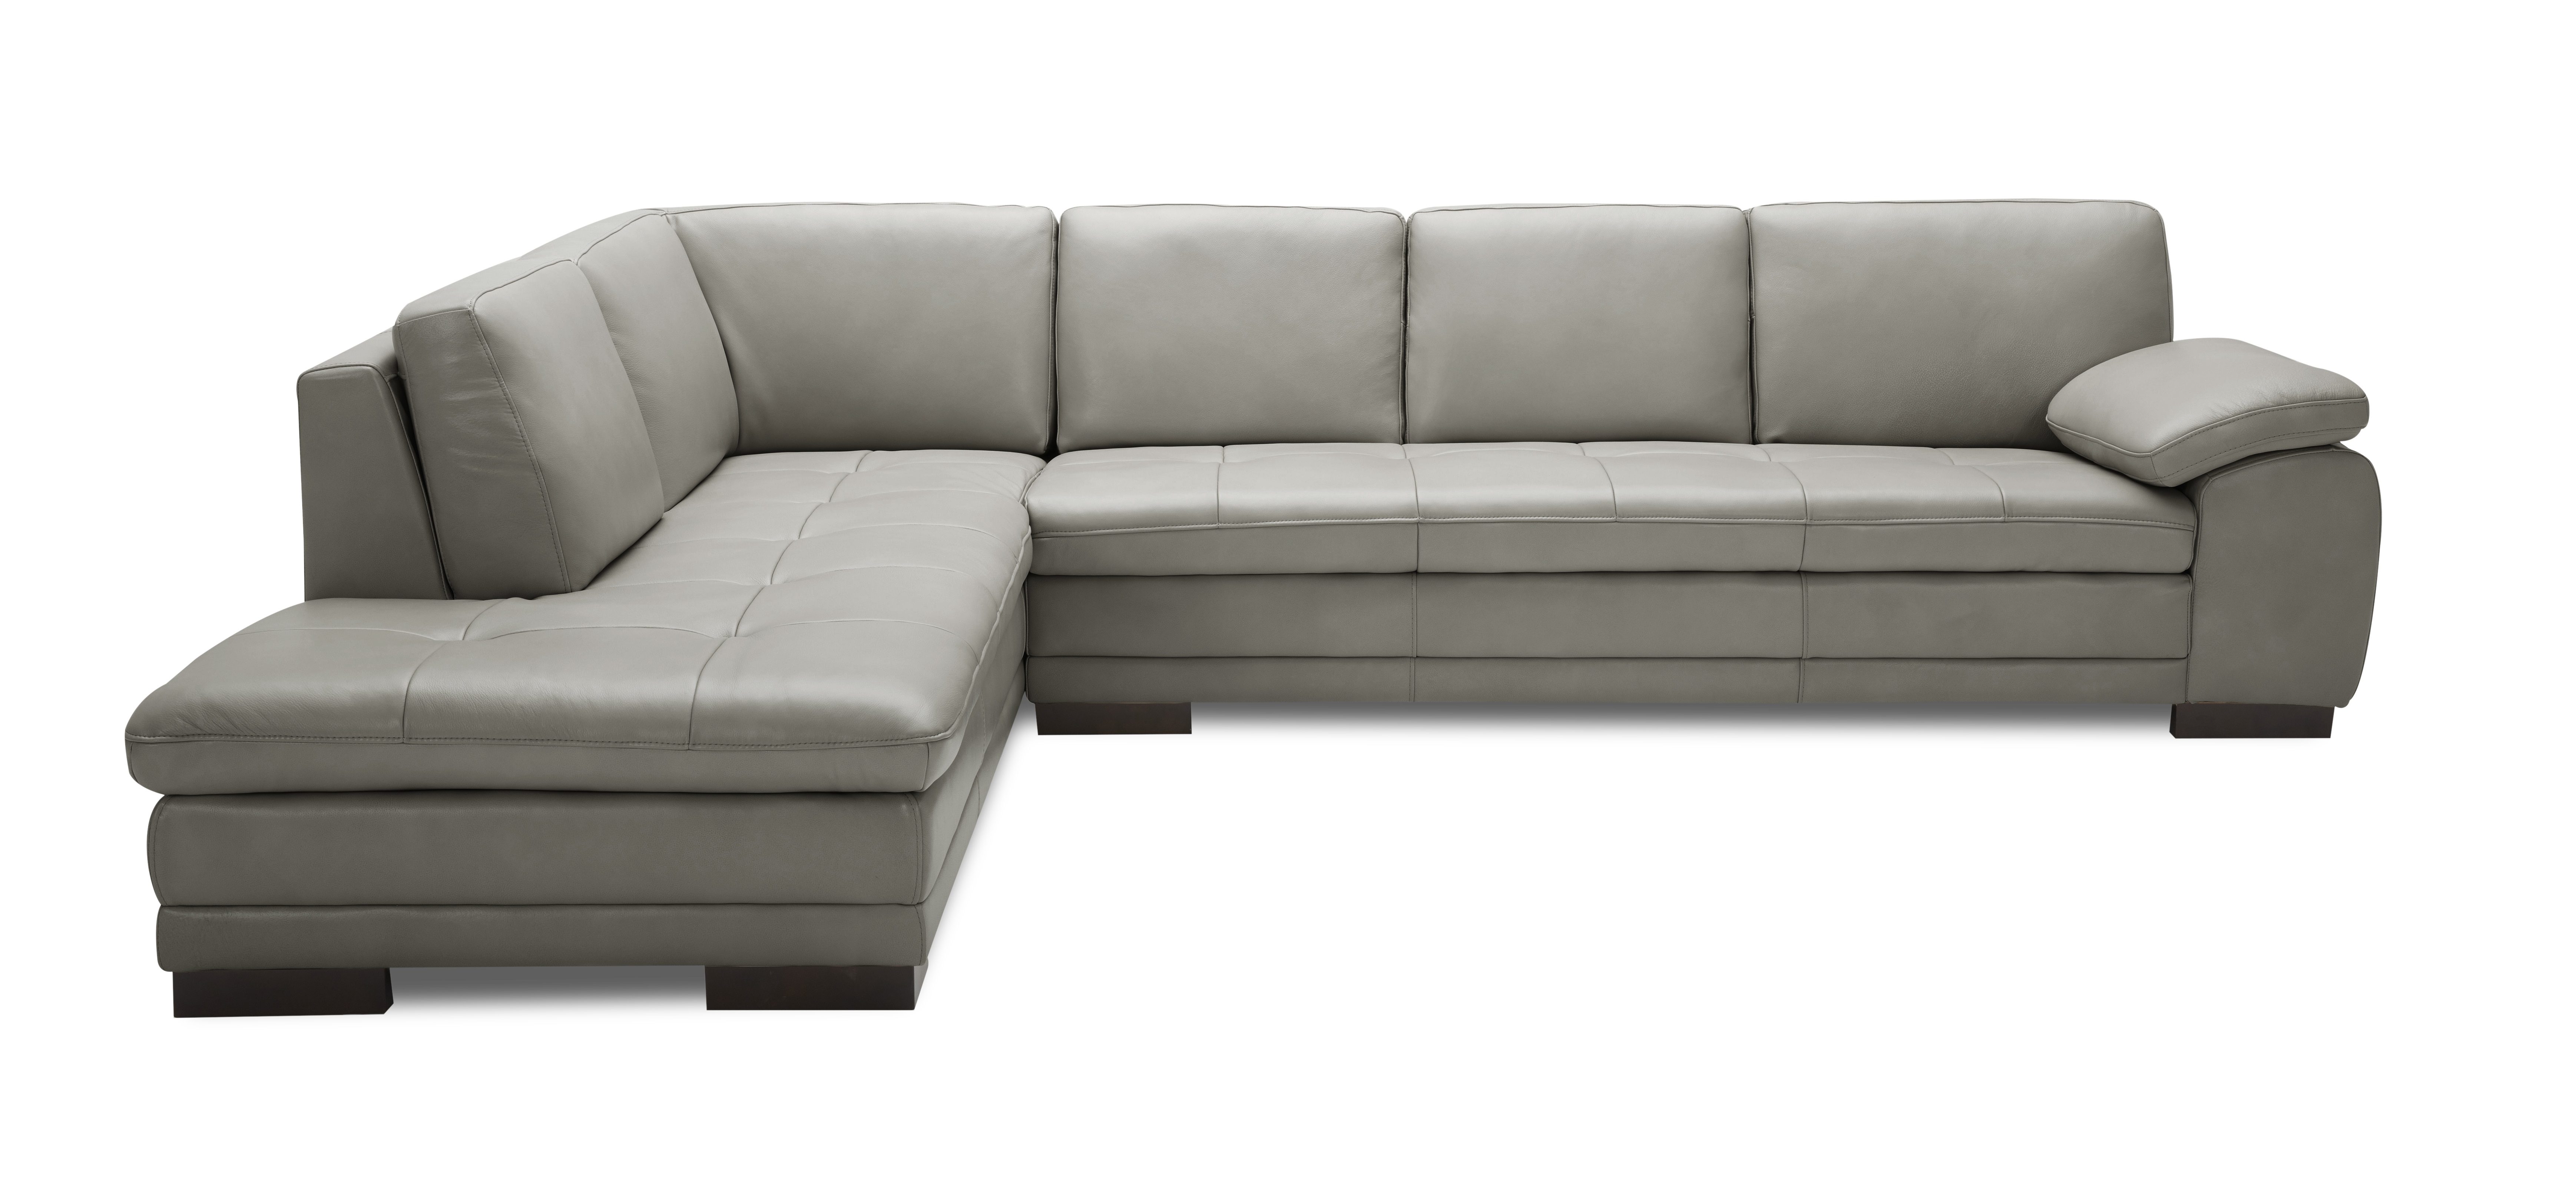 Premium Thick Leather Italian Sectional Jm 397 02 